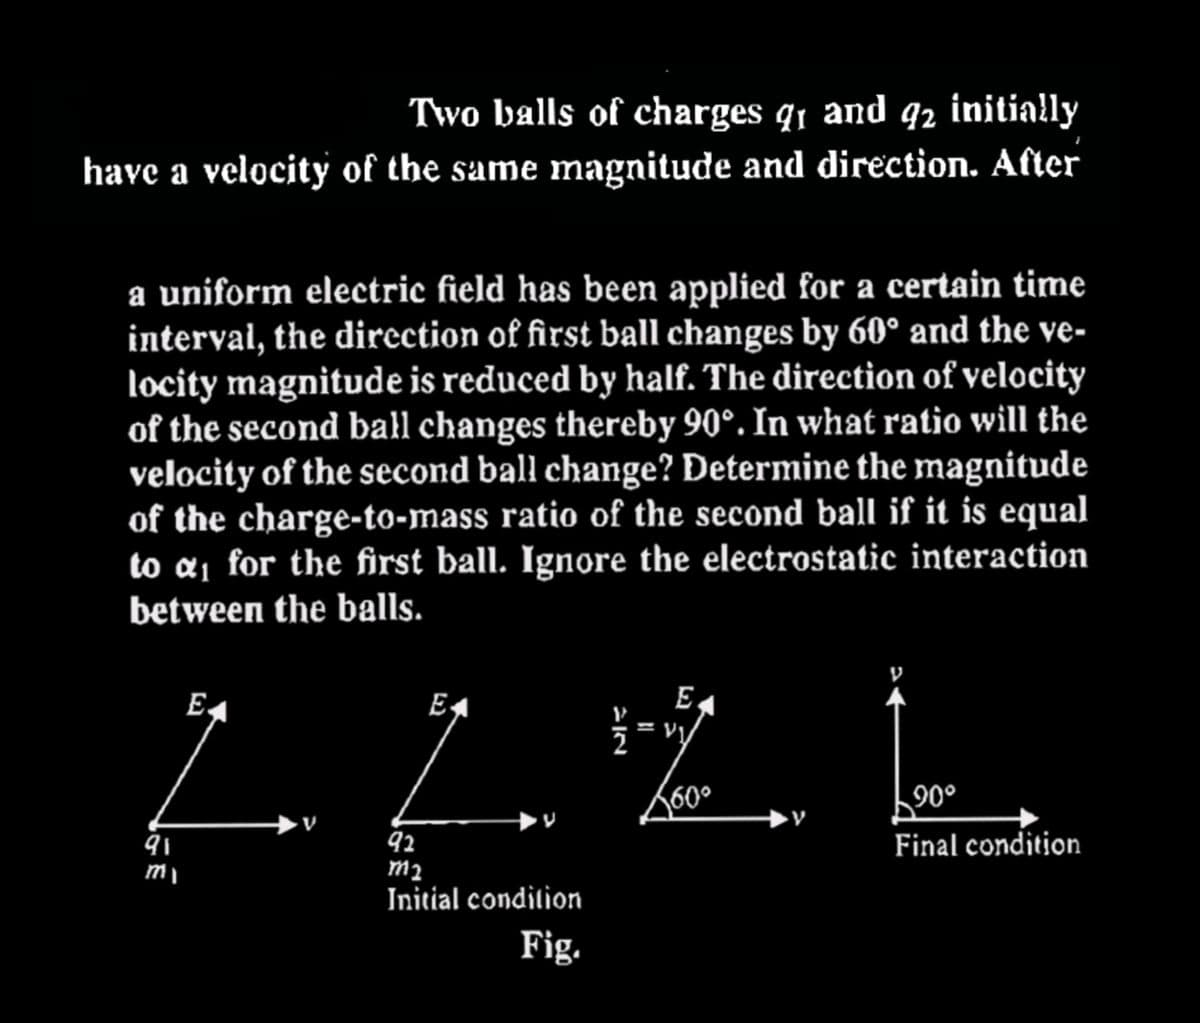 Two balls of charges 9₁ and 92 initially
have a velocity of the same magnitude and direction. After
a uniform electric field has been applied for a certain time
interval, the direction of first ball changes by 60° and the ve-
locity magnitude is reduced by half. The direction of velocity
of the second ball changes thereby 90°. In what ratio will the
velocity of the second ball change? Determine the magnitude
of the charge-to-mass ratio of the second ball if it is equal
to a₁ for the first ball. Ignore the electrostatic interaction
between the balls.
91
my
E
E
92
M₂
Initial condition
Fig.
E.
1/2 = vy
560⁰
90°
Final condition